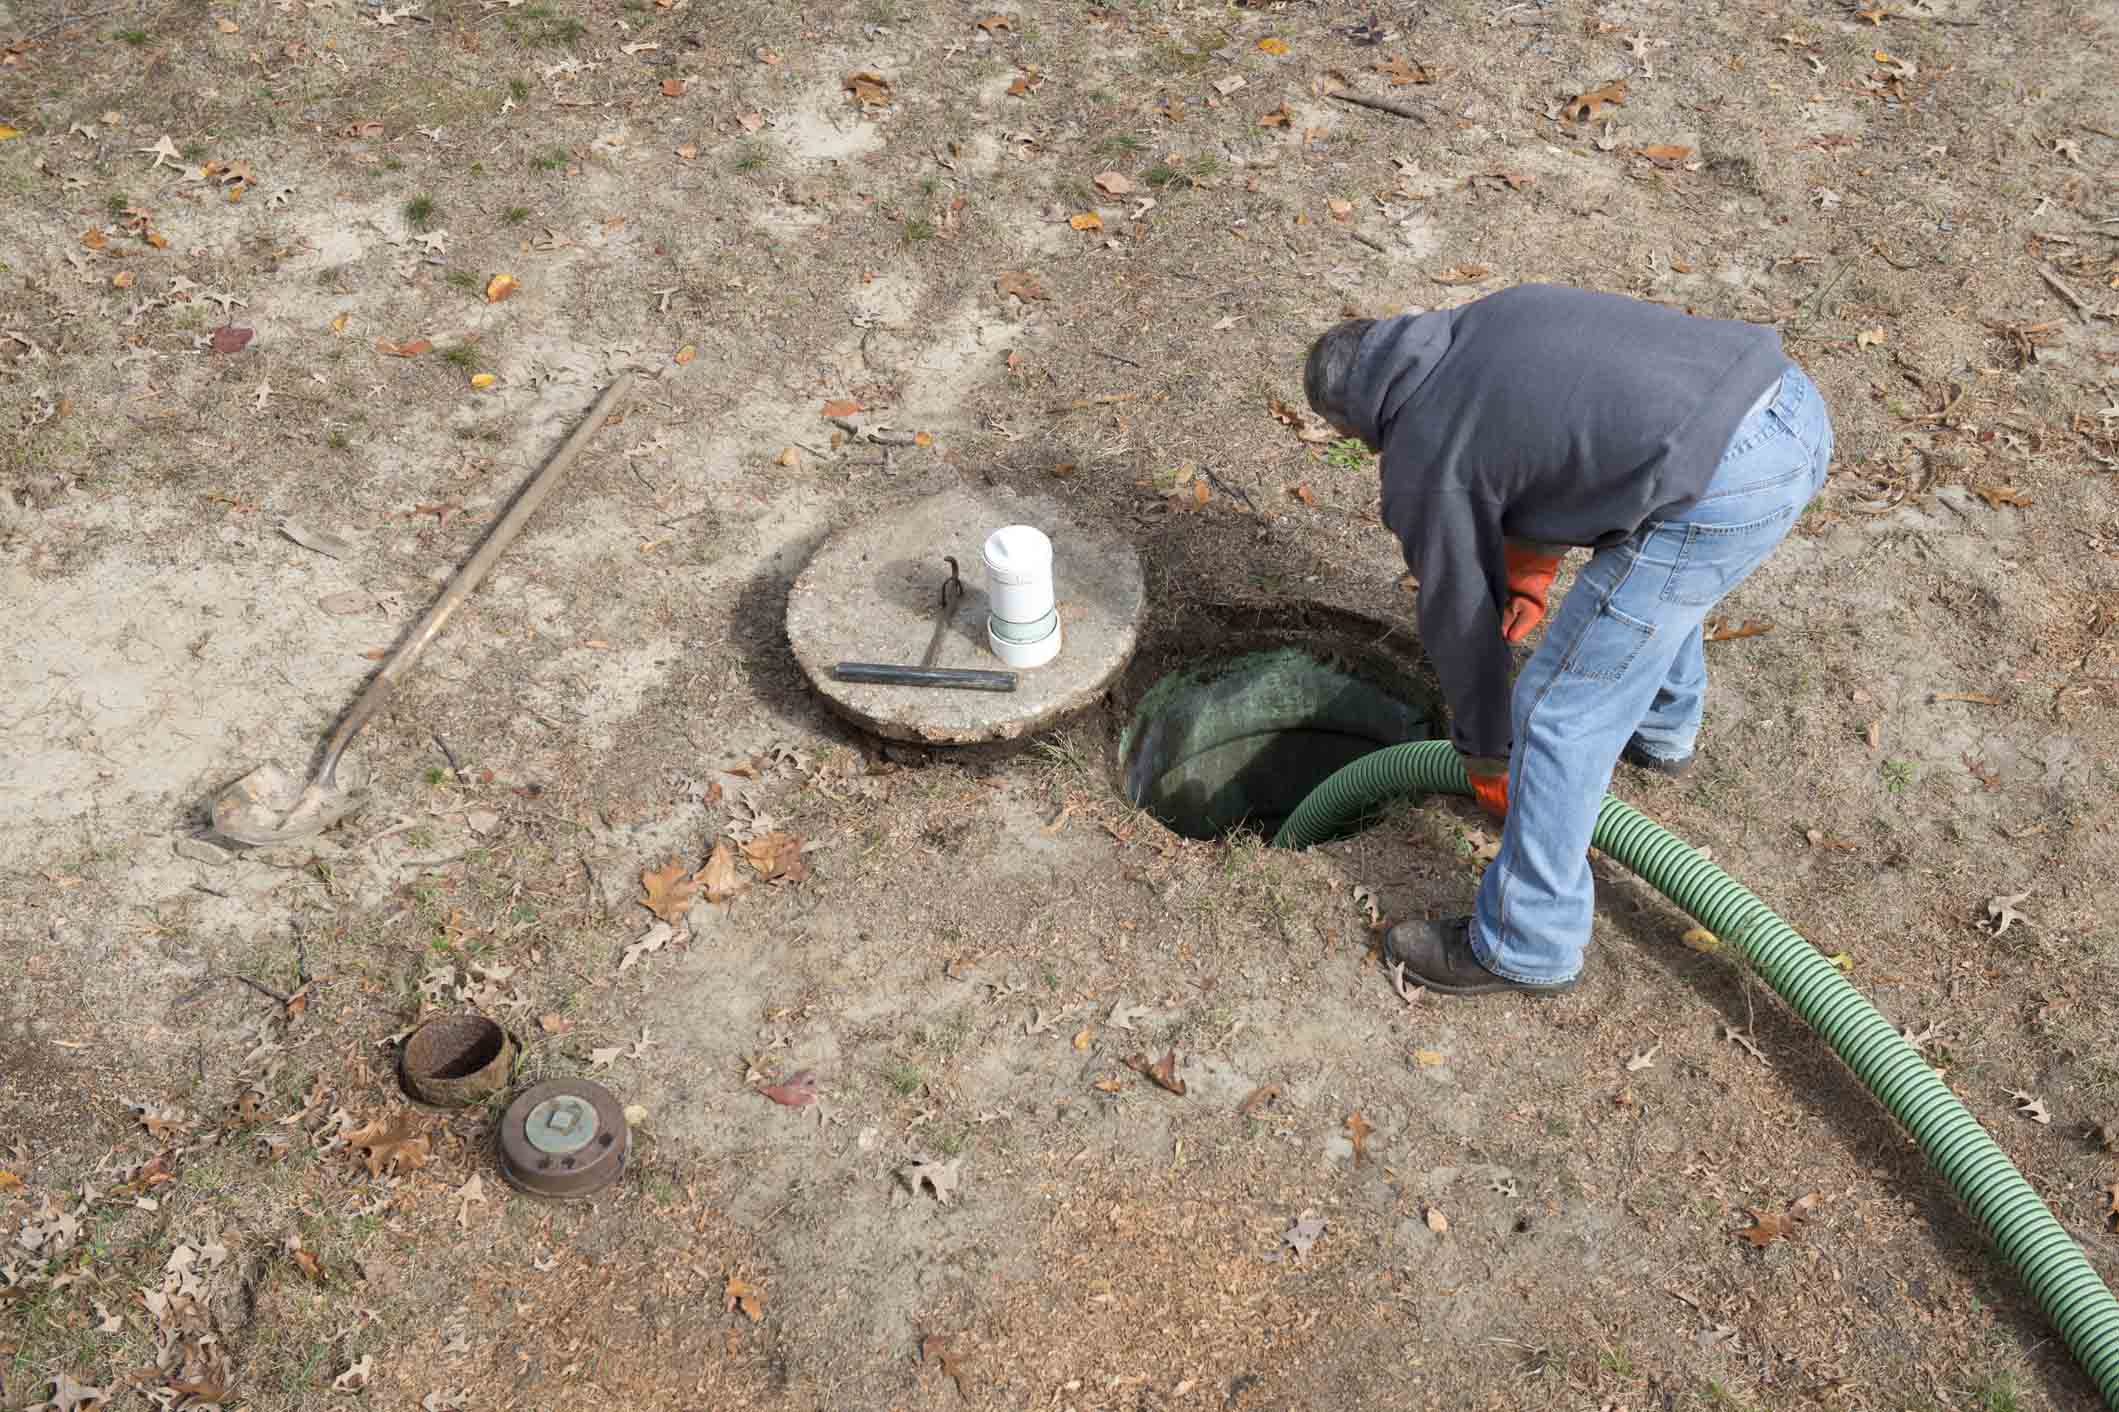 Septic worker inserts hose to pump home sewage from septic tank.